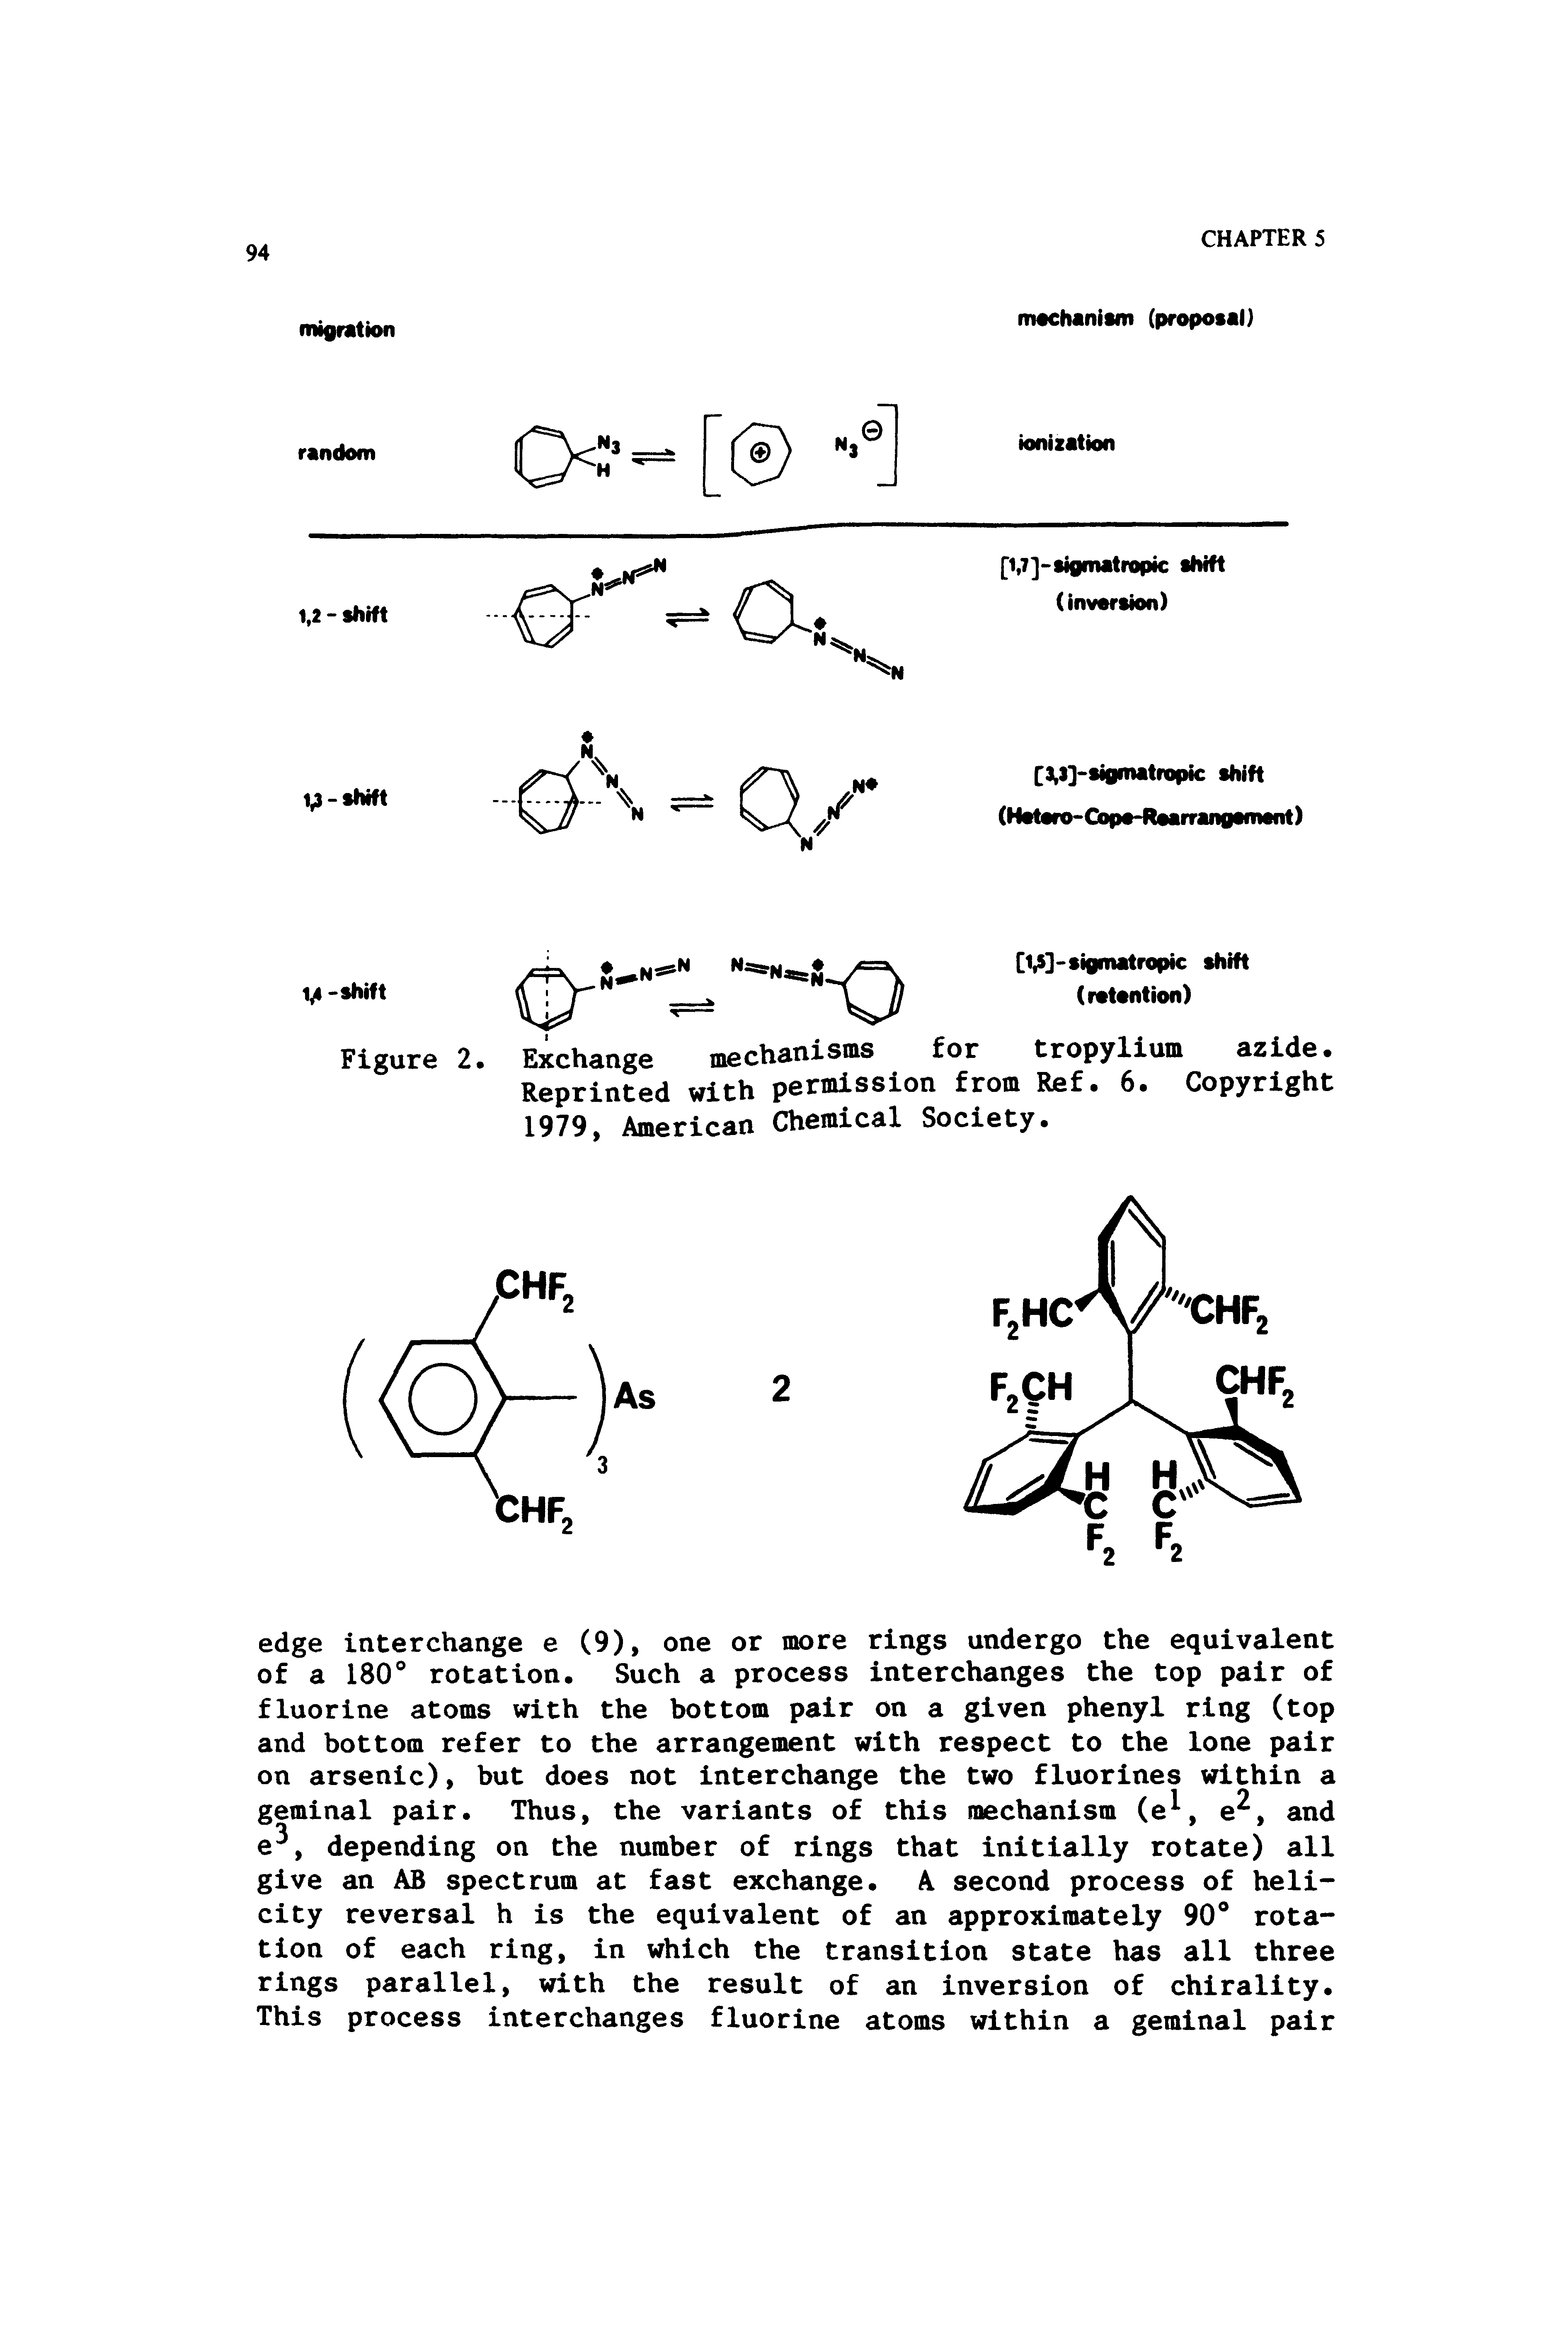 Figure 2. Exchange mechanisms for tropylium azide Reprinted with permission from Ref. 6. Copyright 1979, American Chemical Society.